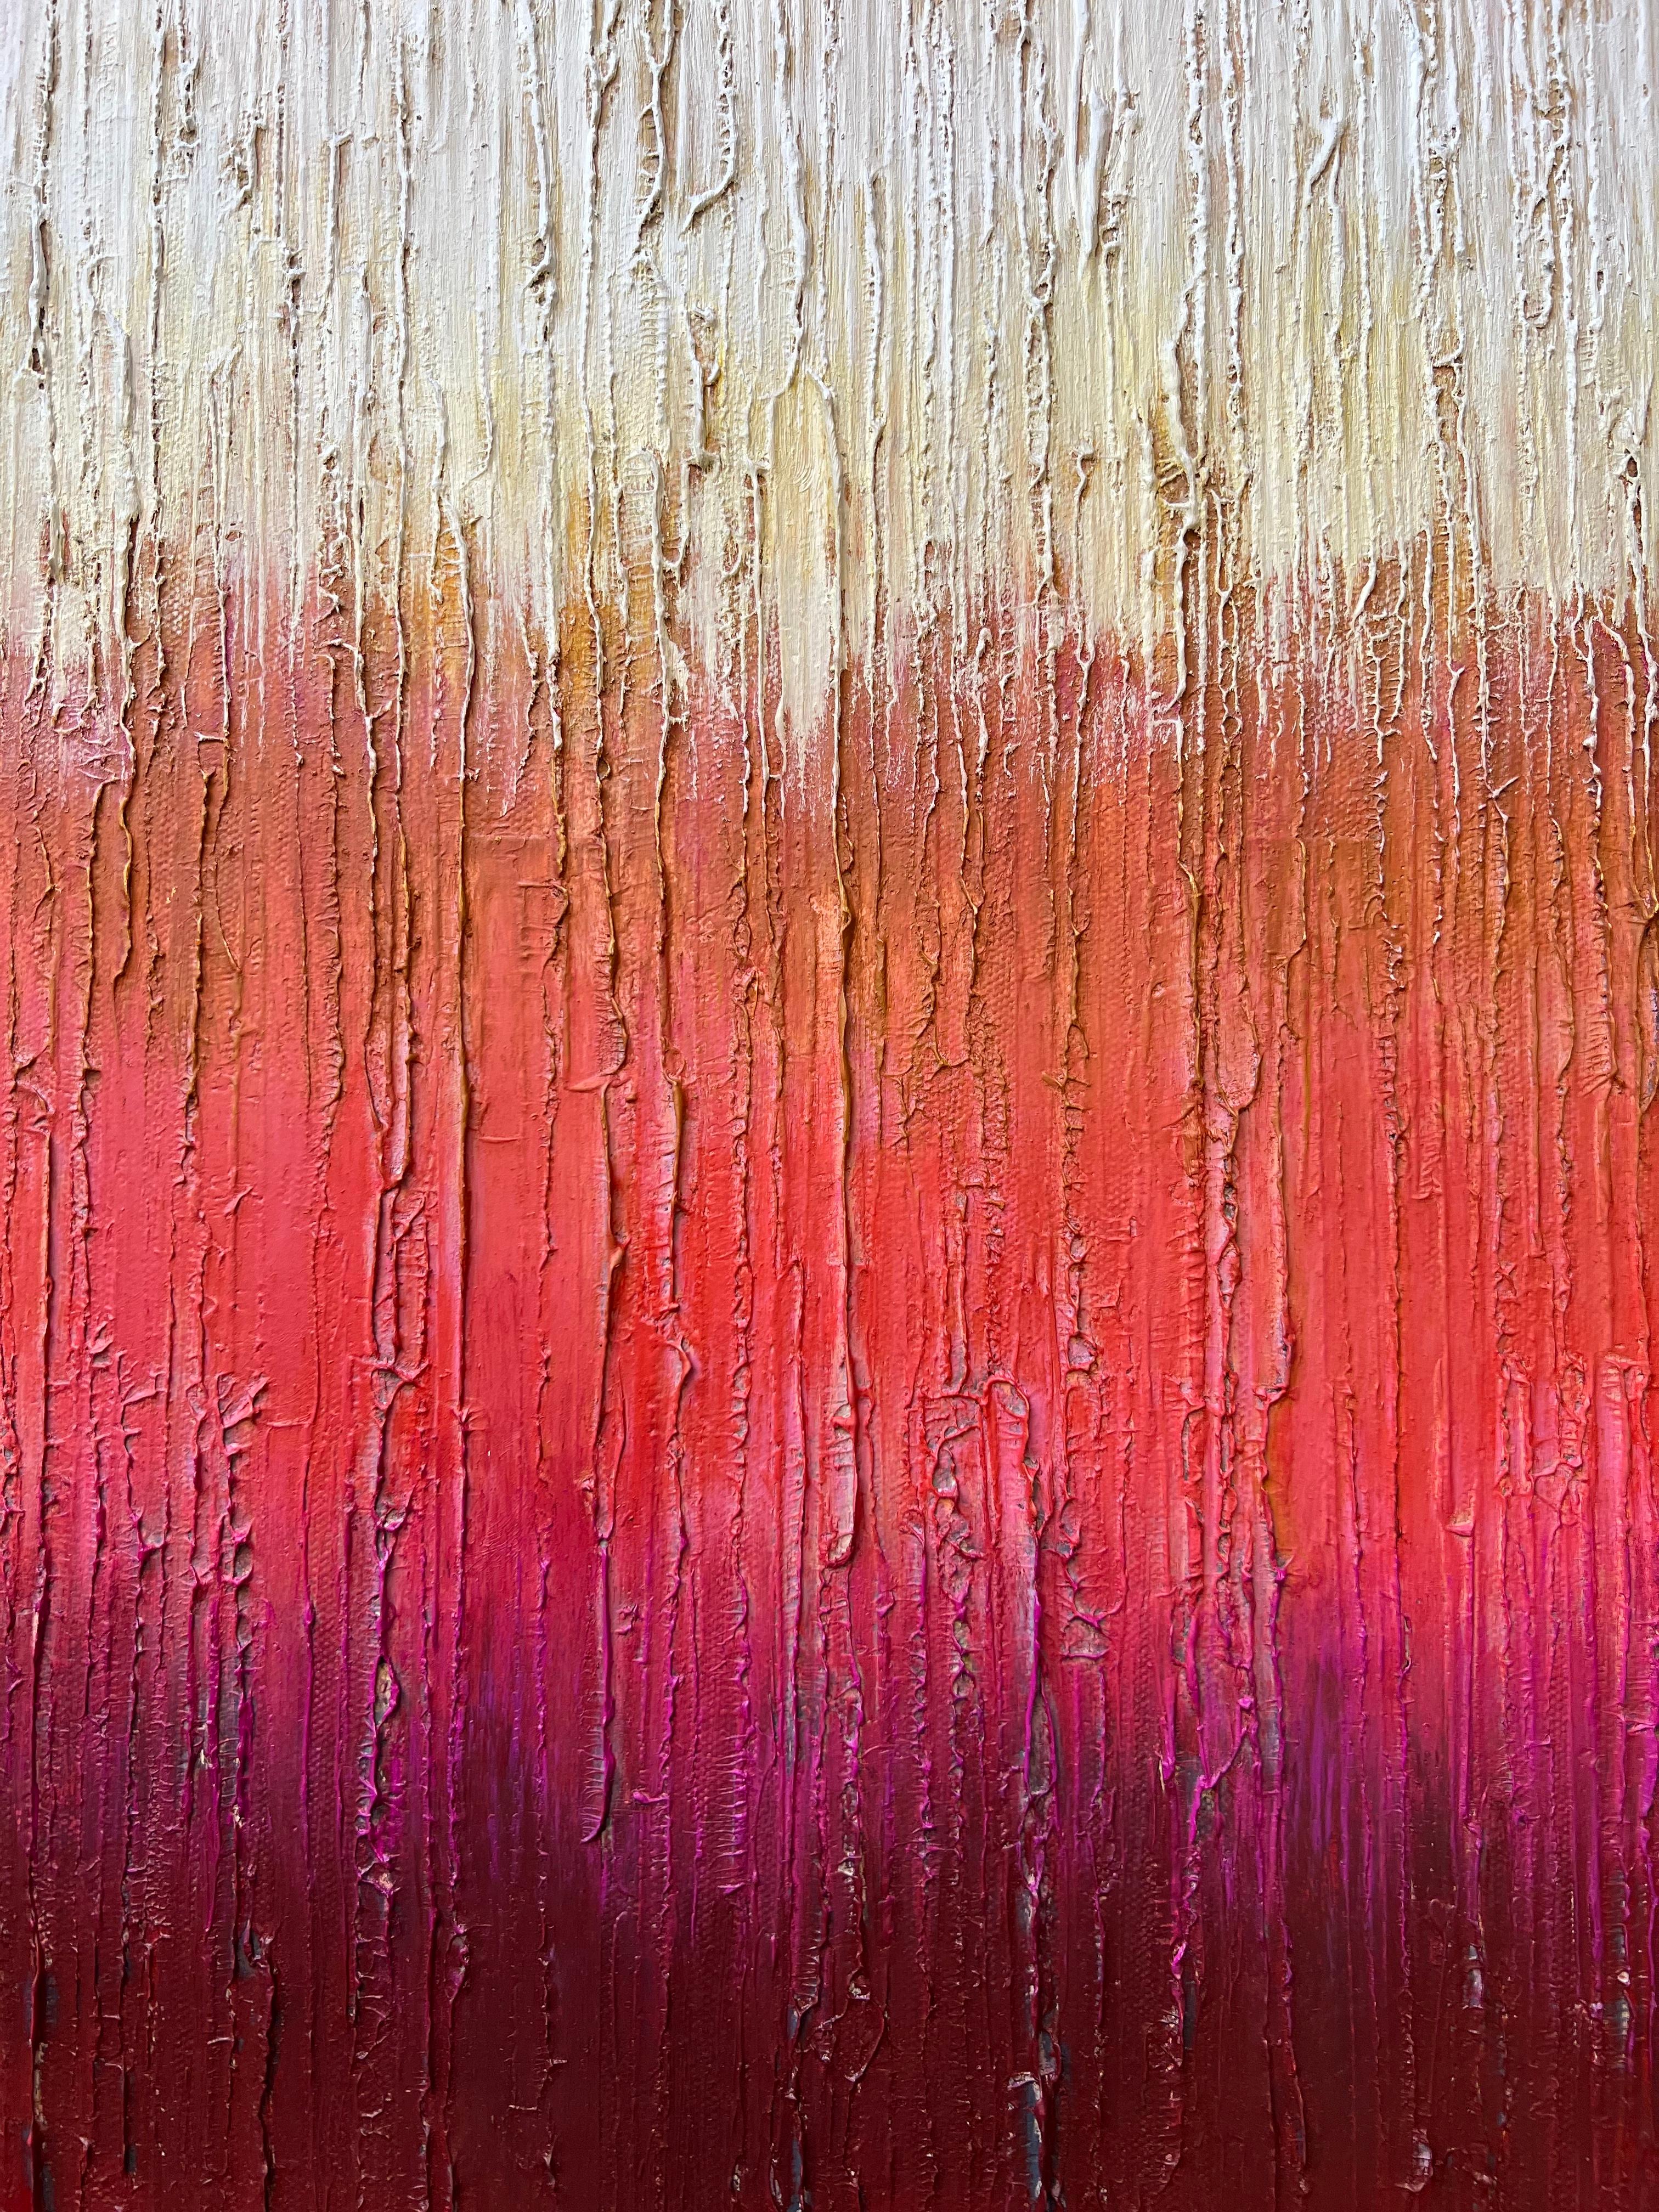 <p>Artist Comments<br>A stunning gradation of cream to brilliant and deep red cascades gently in this charming abstract landscape. Part of artist Janet Hamilton's series that utilizes textured surfaces predominated by lines. Janet incorporates a